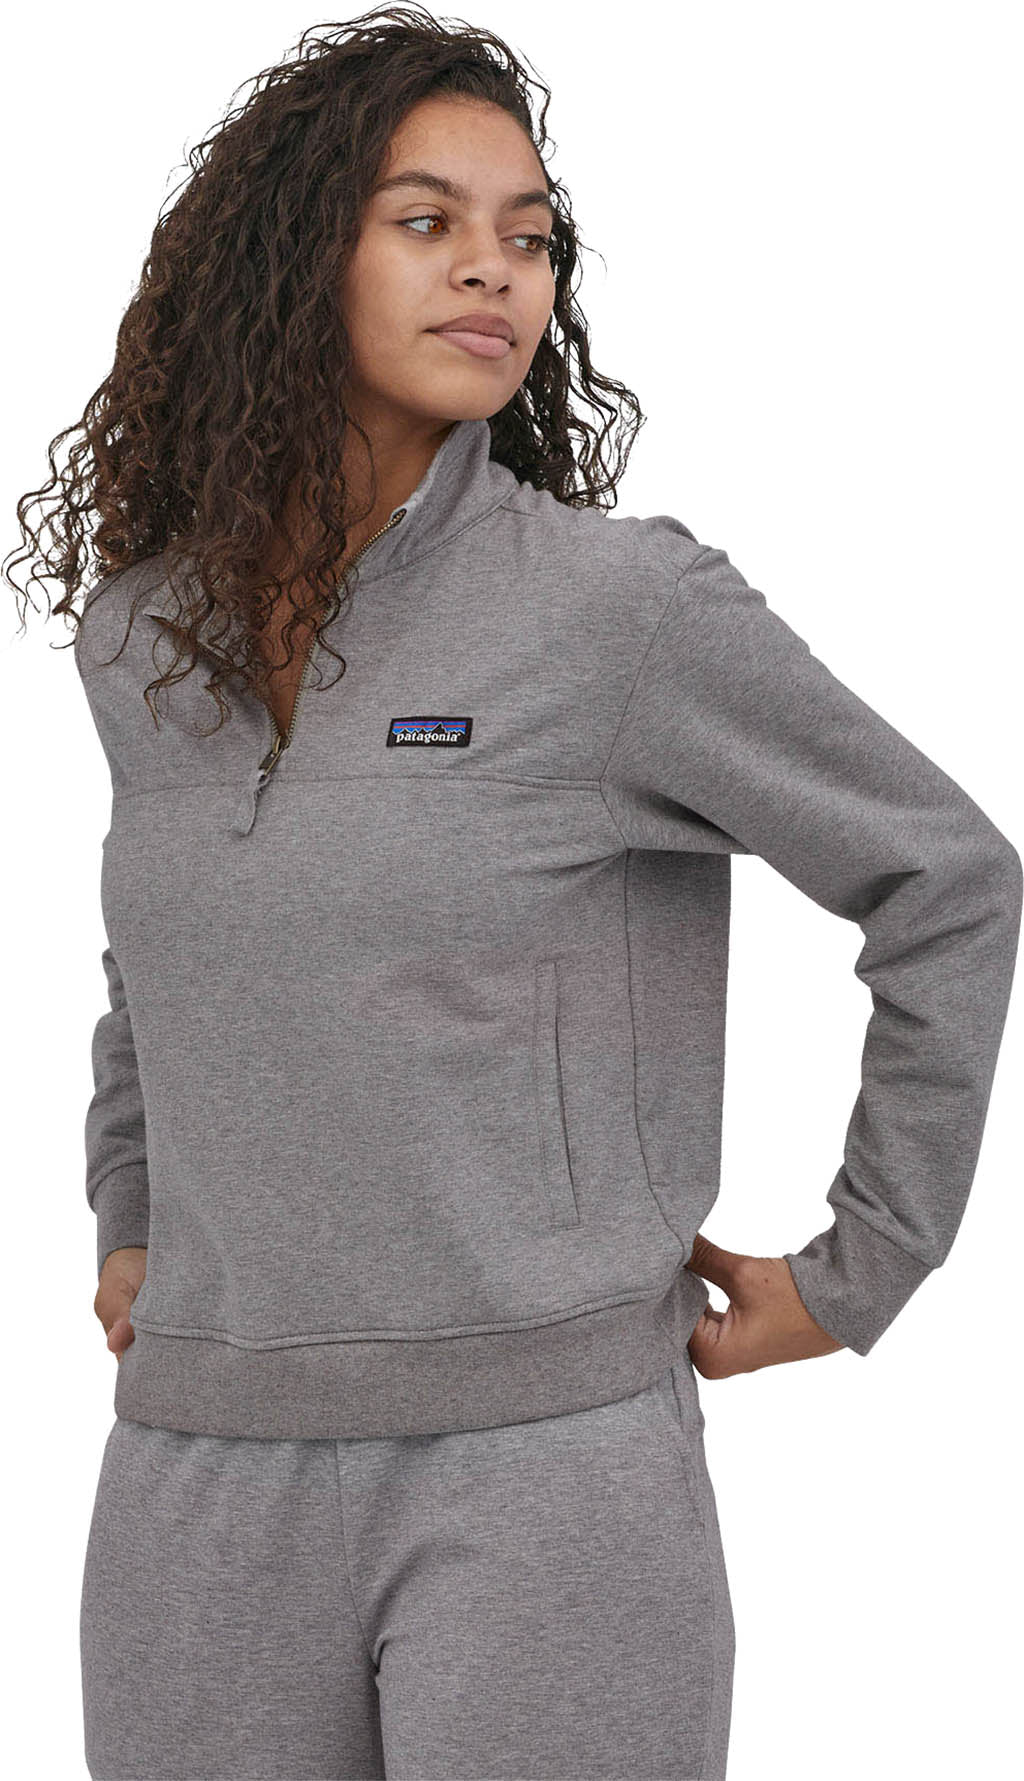 Patagonia Ahnya Pullover   Women's   Altitude Sports